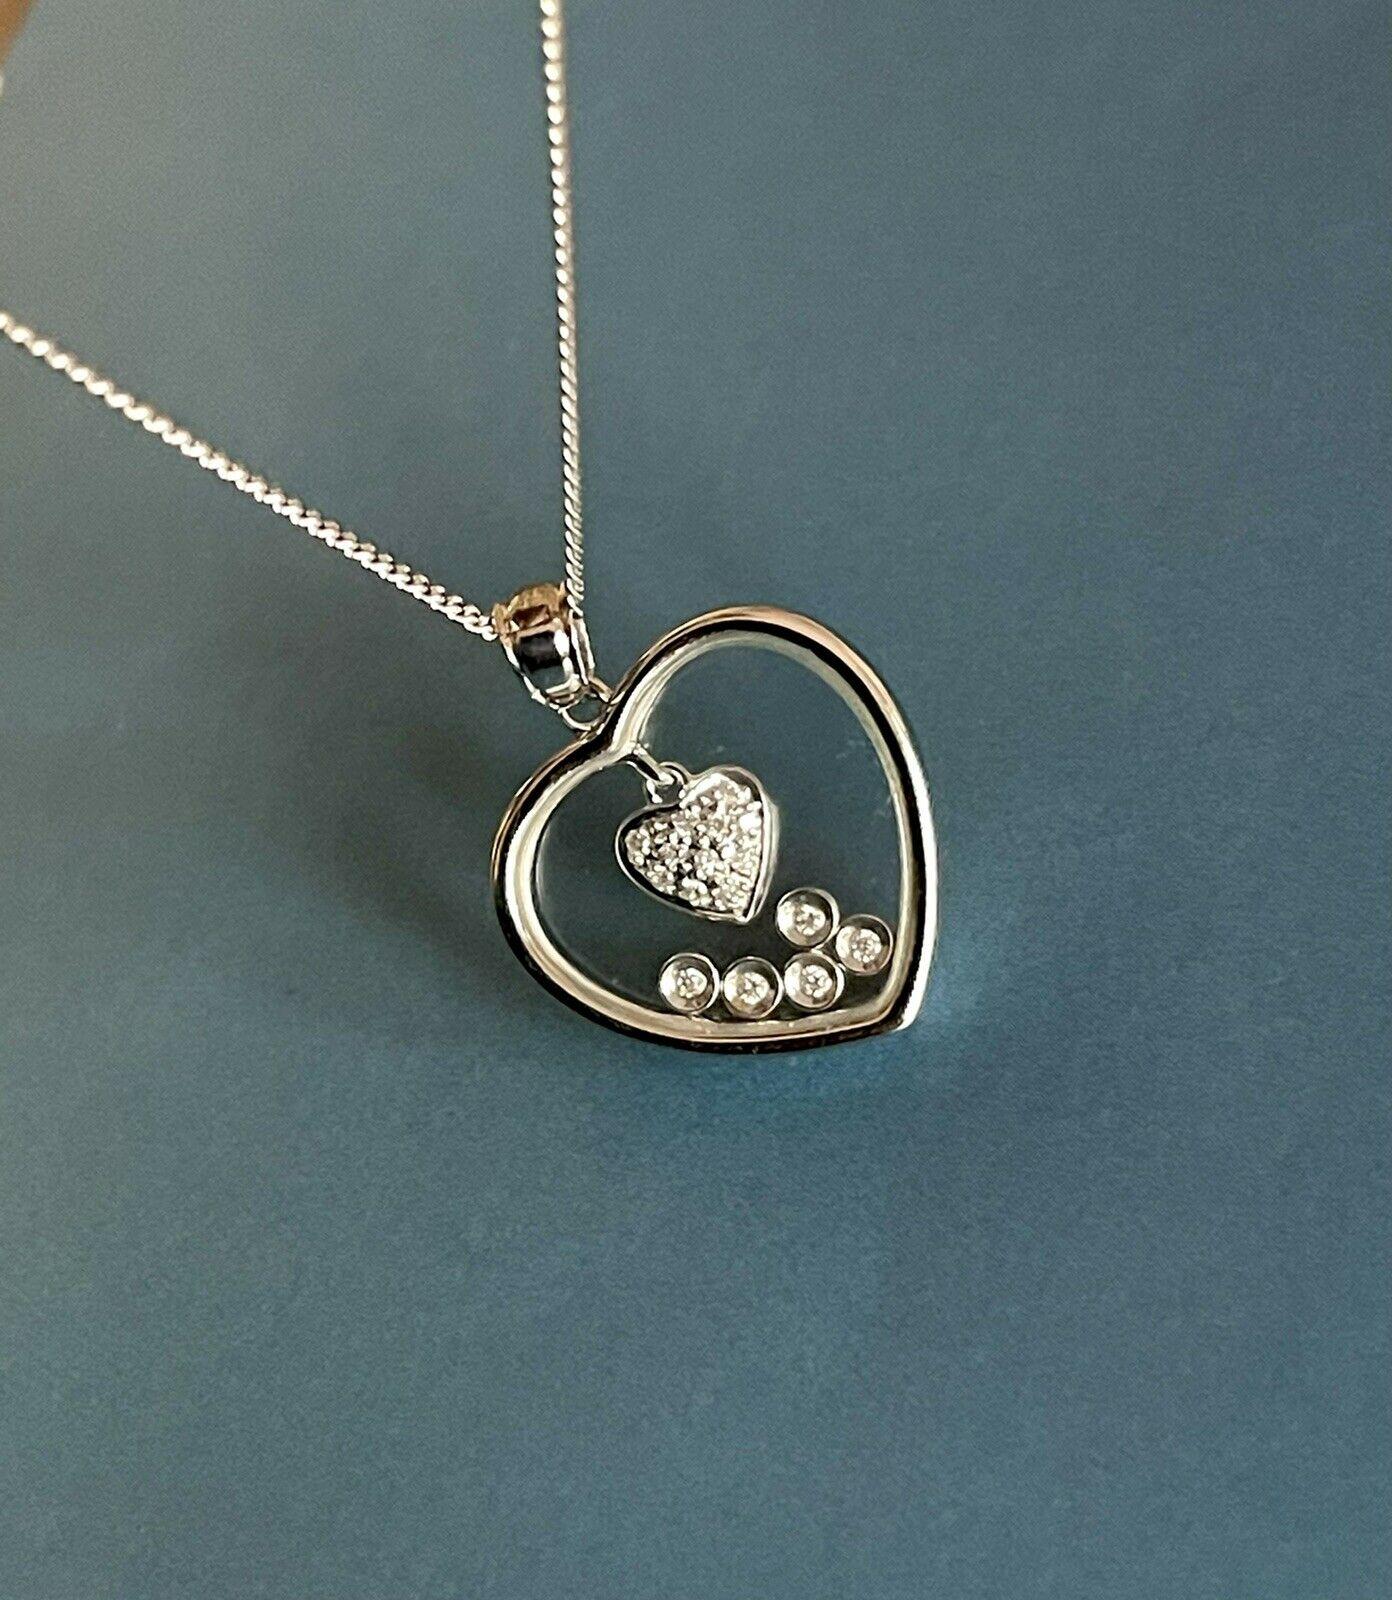 Women's 9ct White Gold Dancing Diamond Necklace 0.22ct Floating Diamond Heart Pendant Ch For Sale